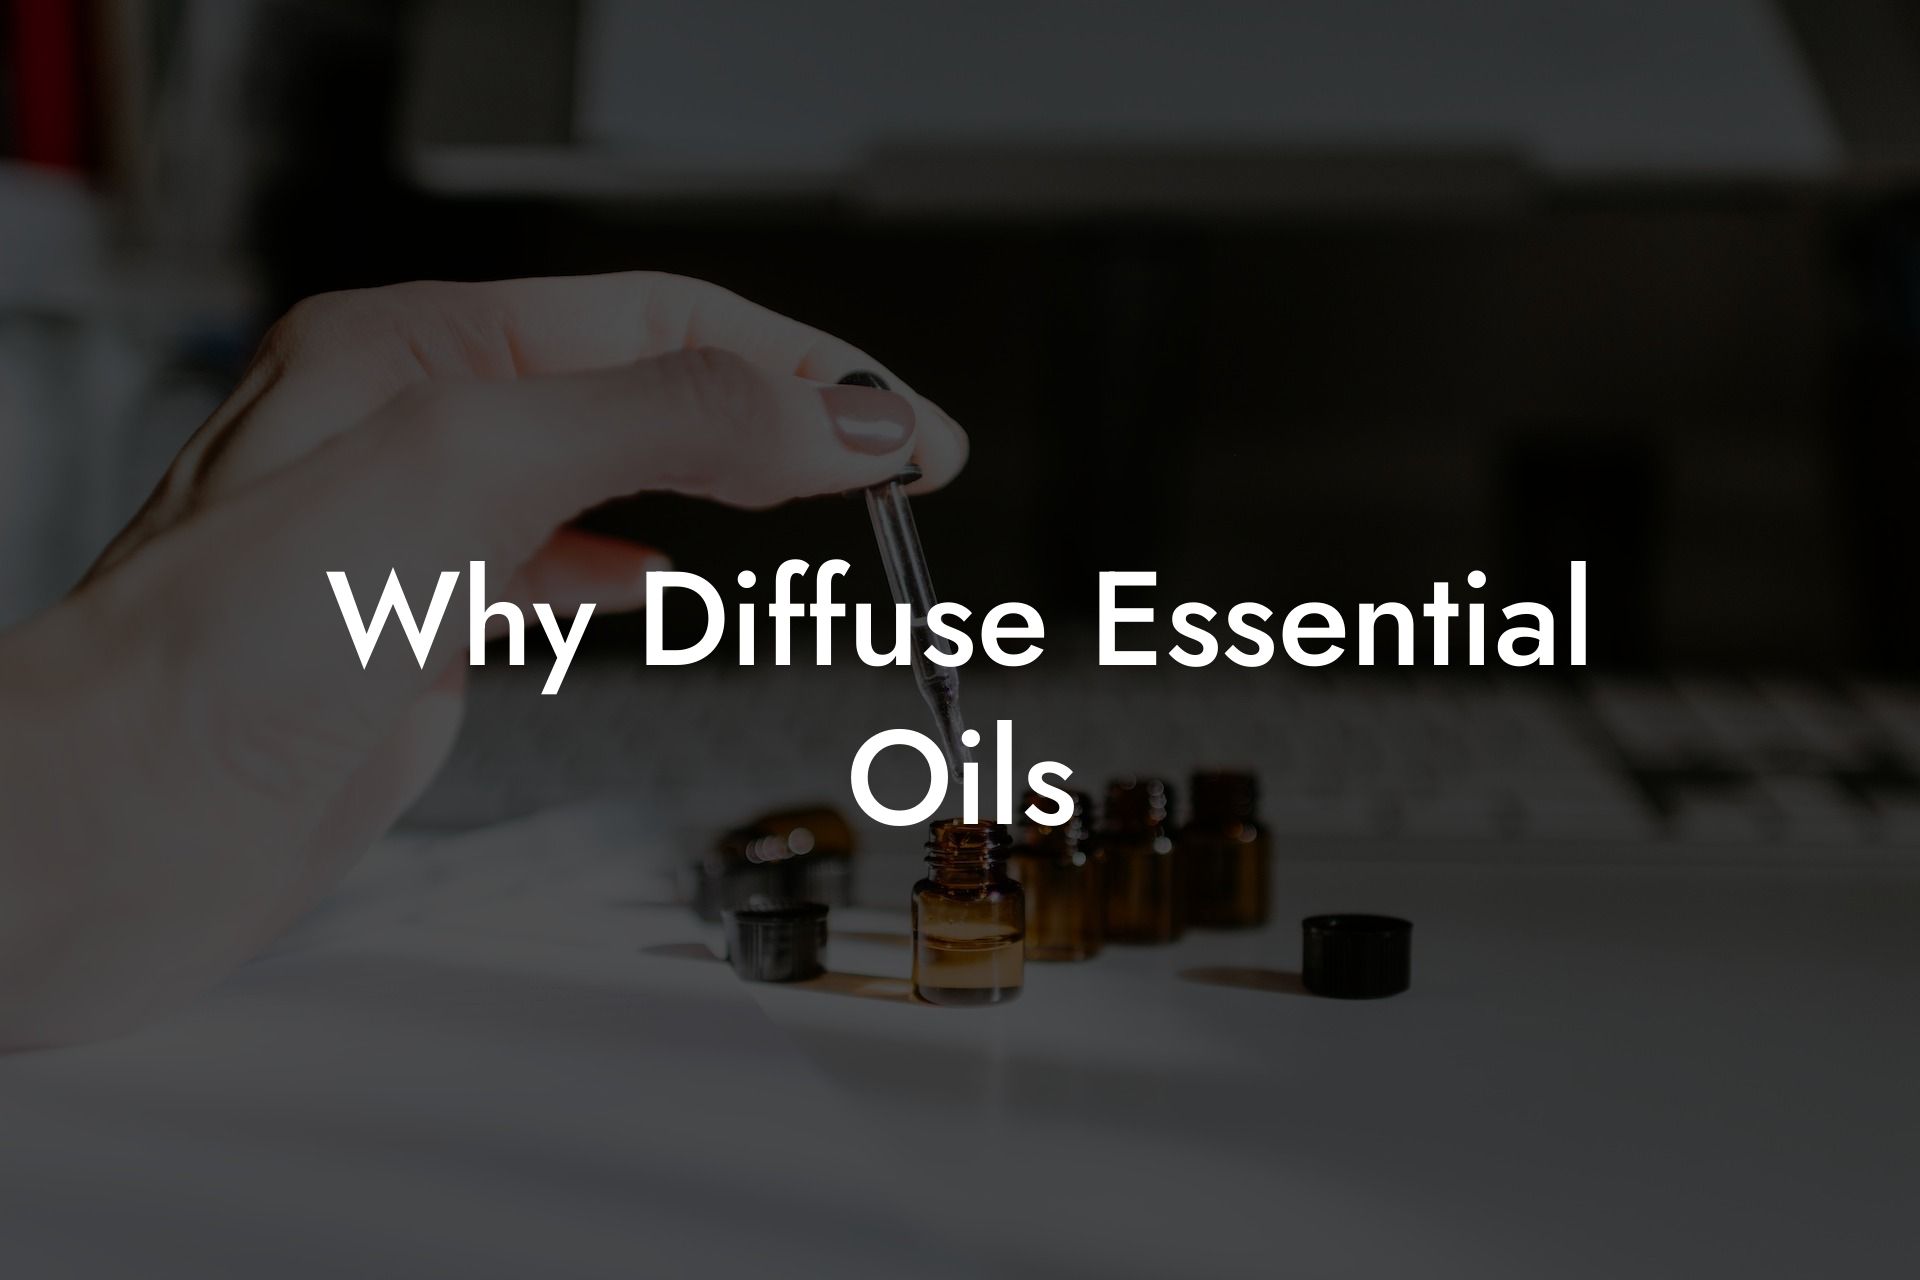 Why Diffuse Essential Oils